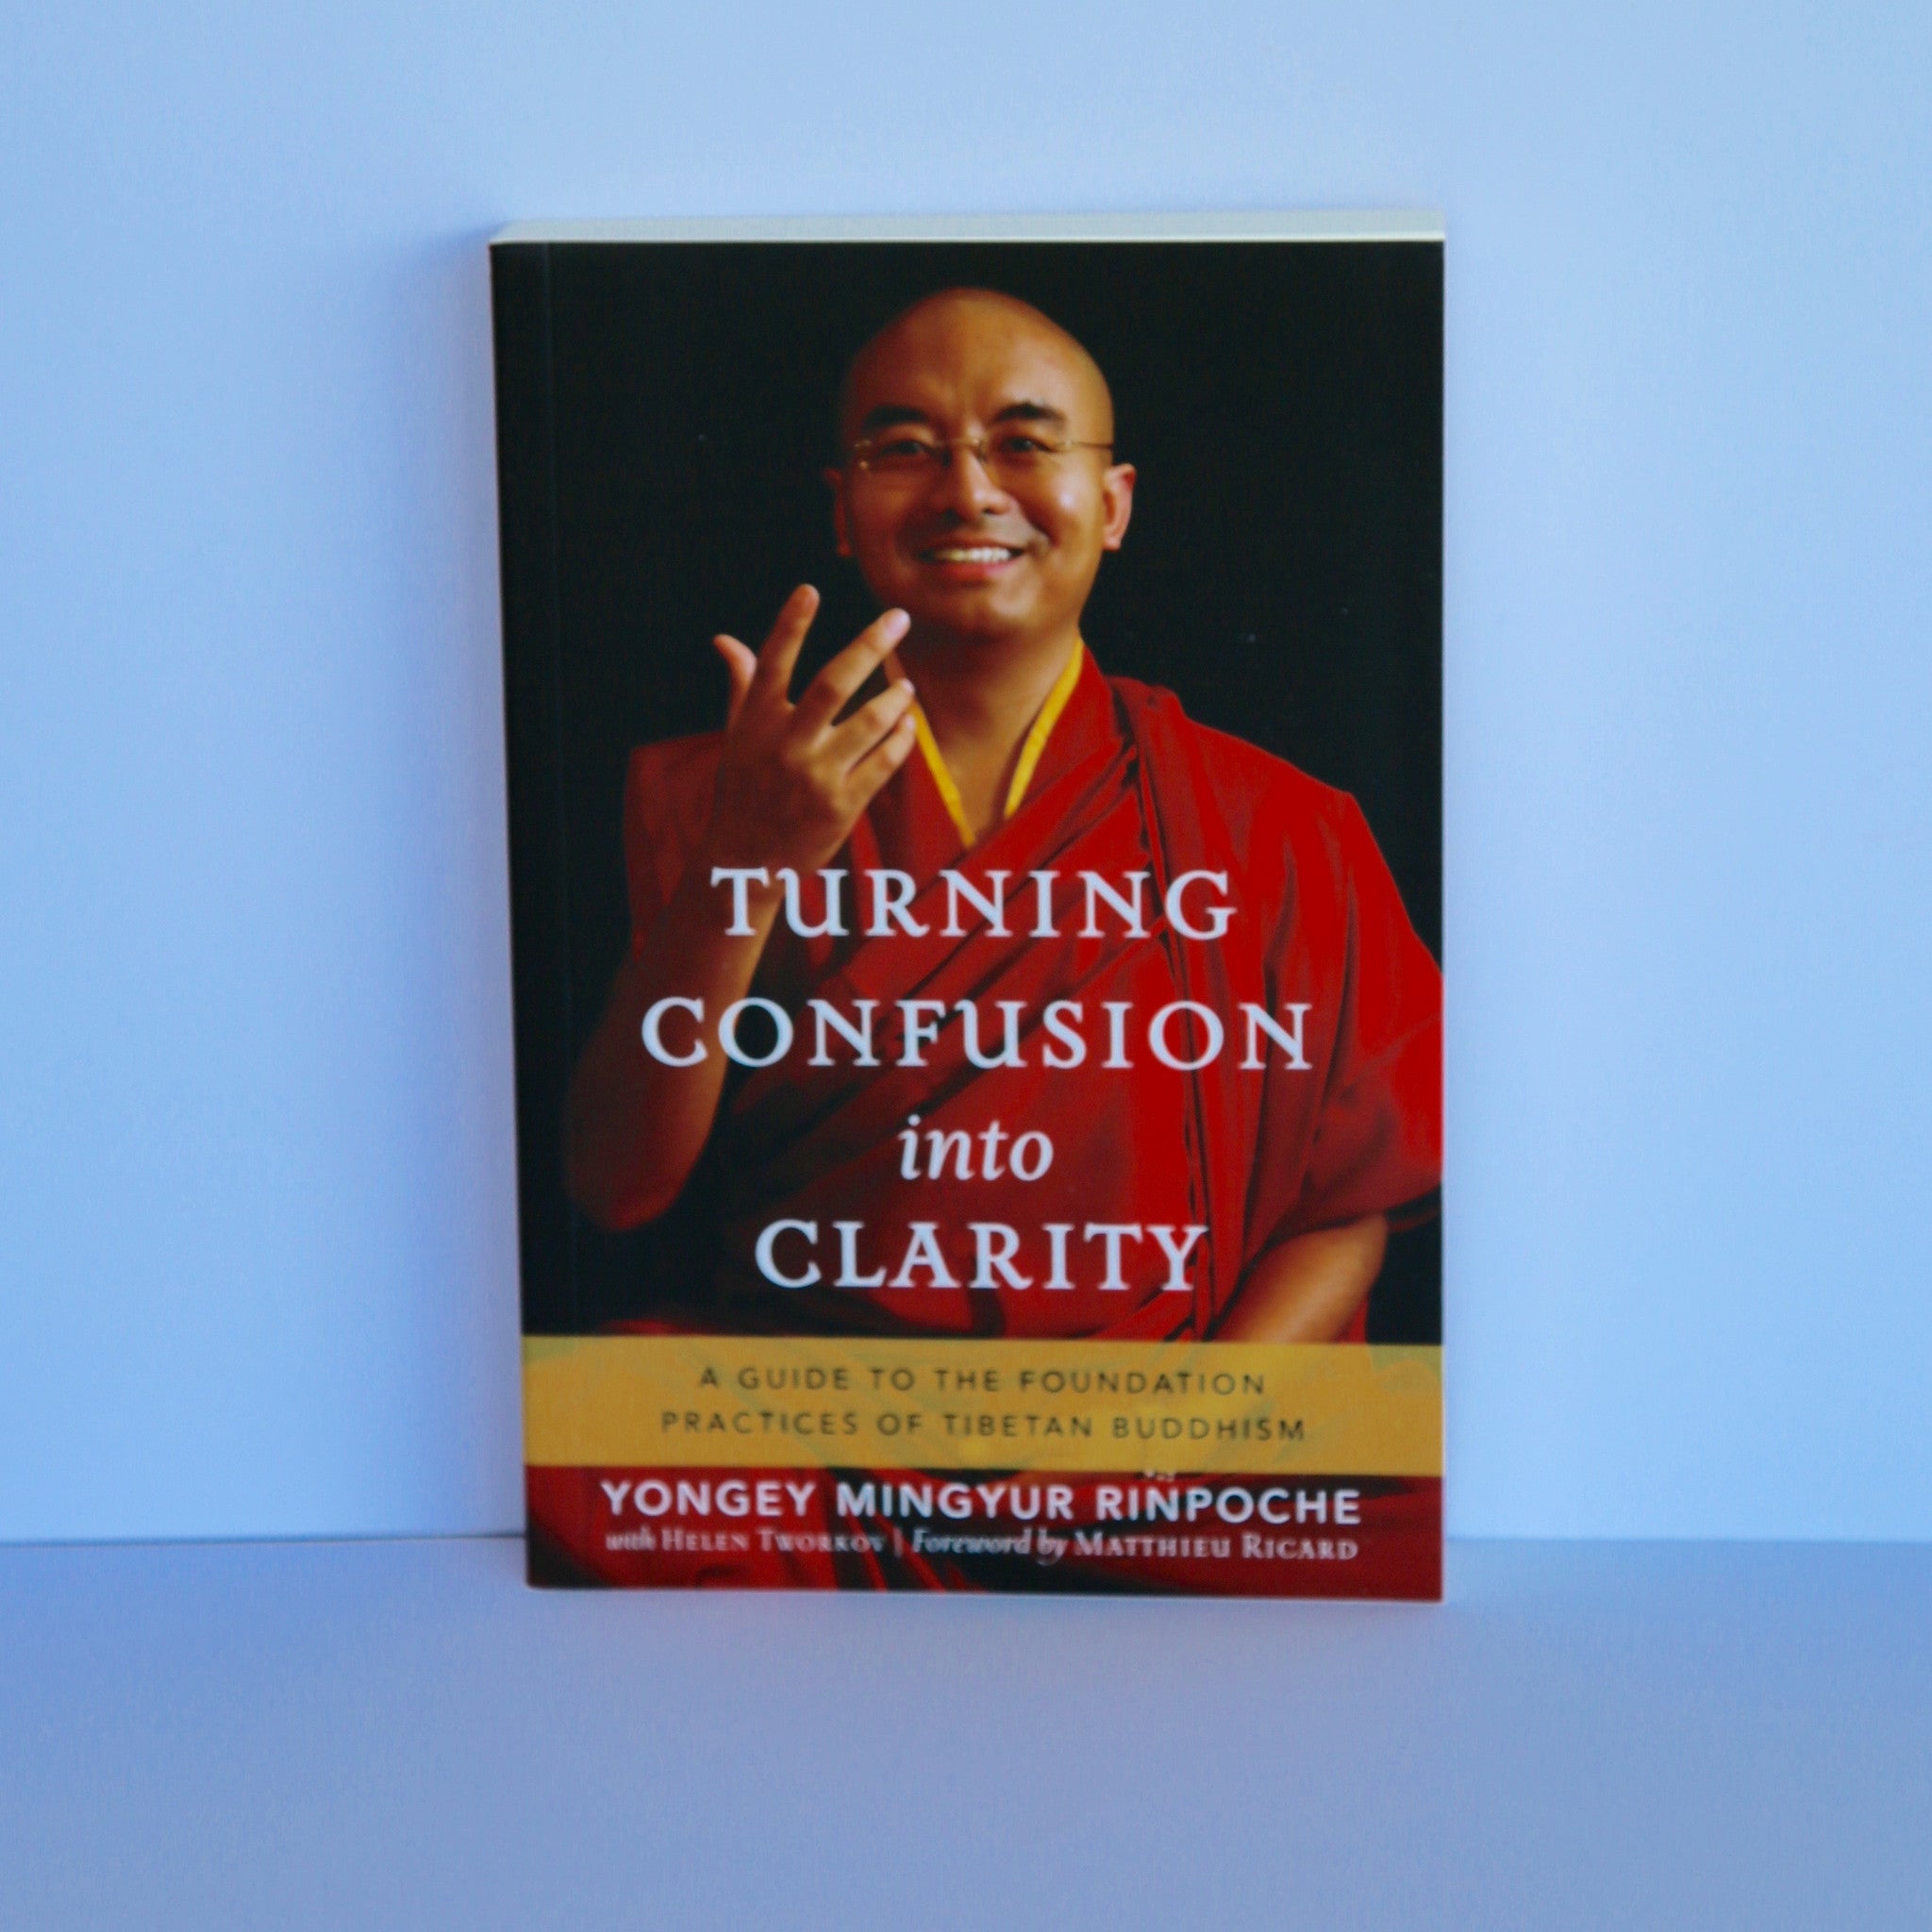 Turning Confusion into Clarity - A Guide to the Foundation Practices of Tibetan Buddhism by Yongey Mingyur Rinpoche with Helen Tworkov